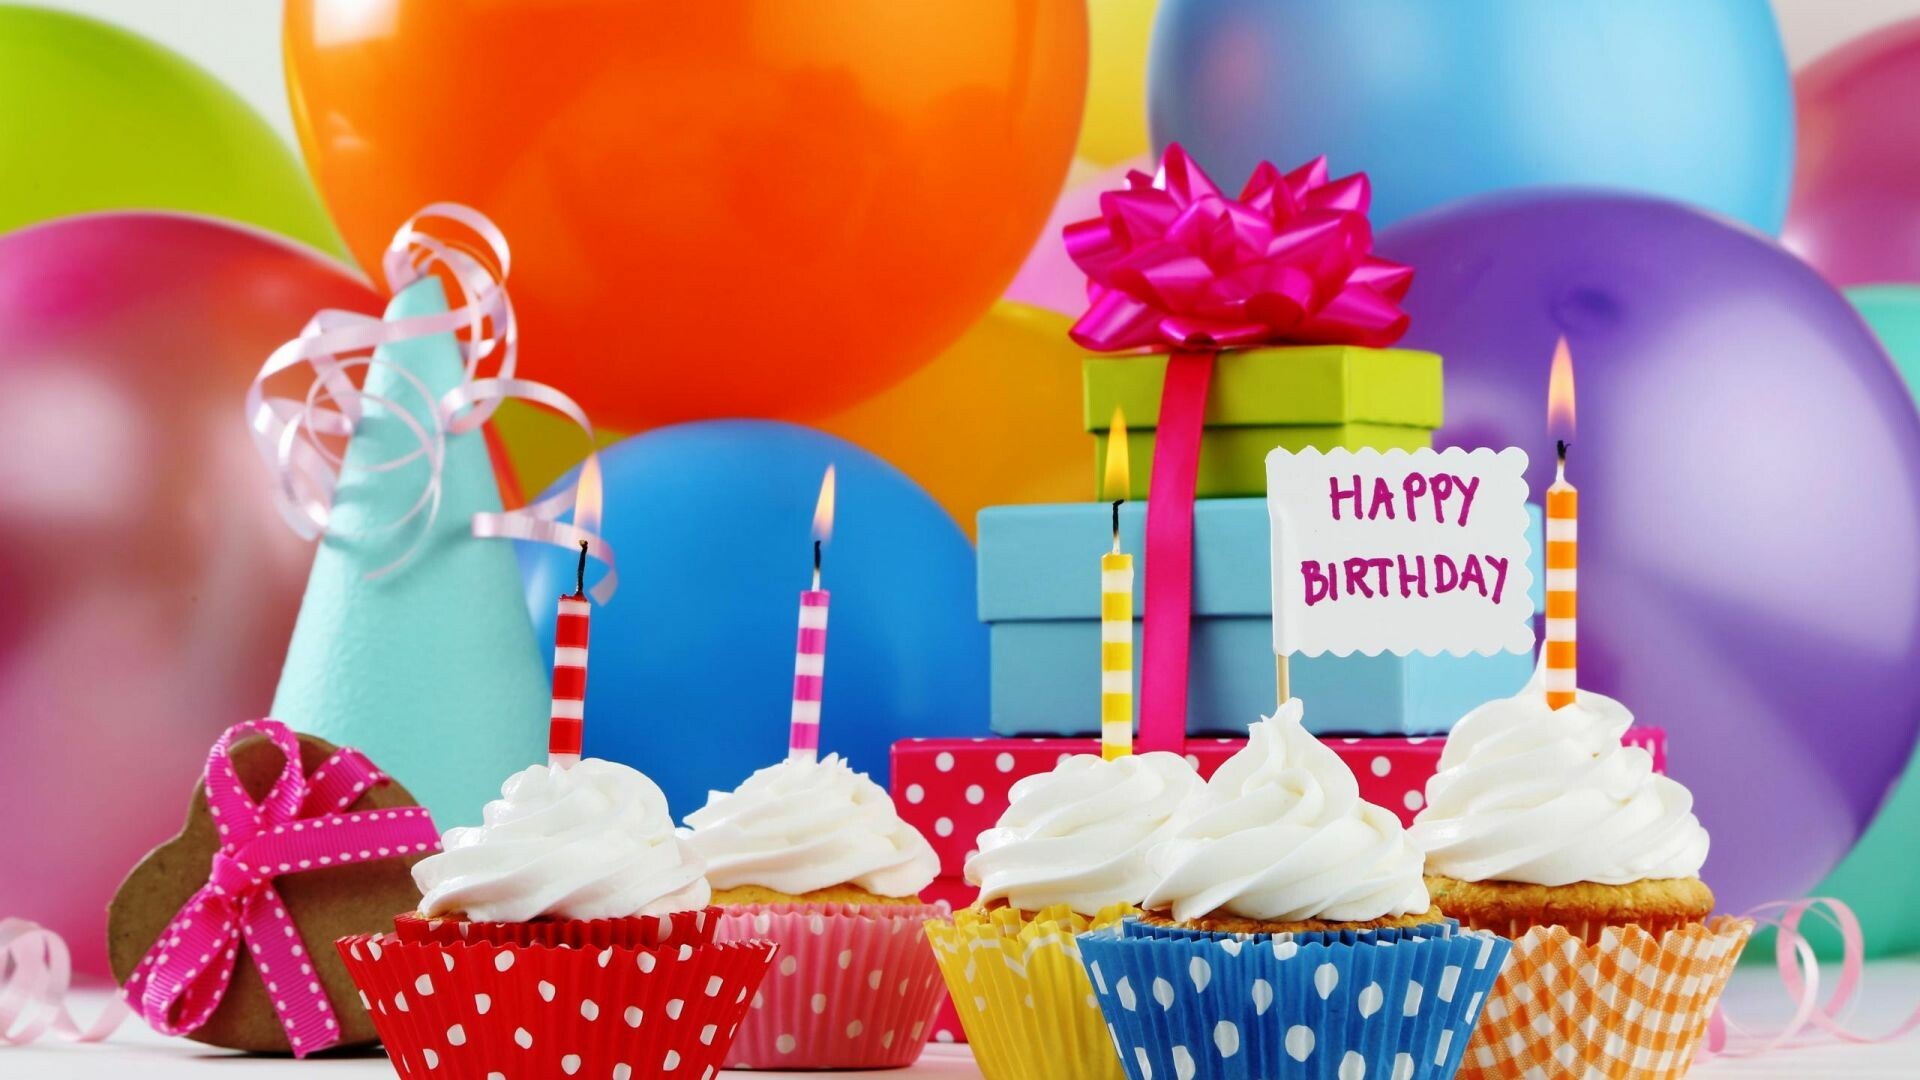 Birthday Party: Gifts, Sweets, Candles, Anniversary. 1920x1080 Full HD Background.